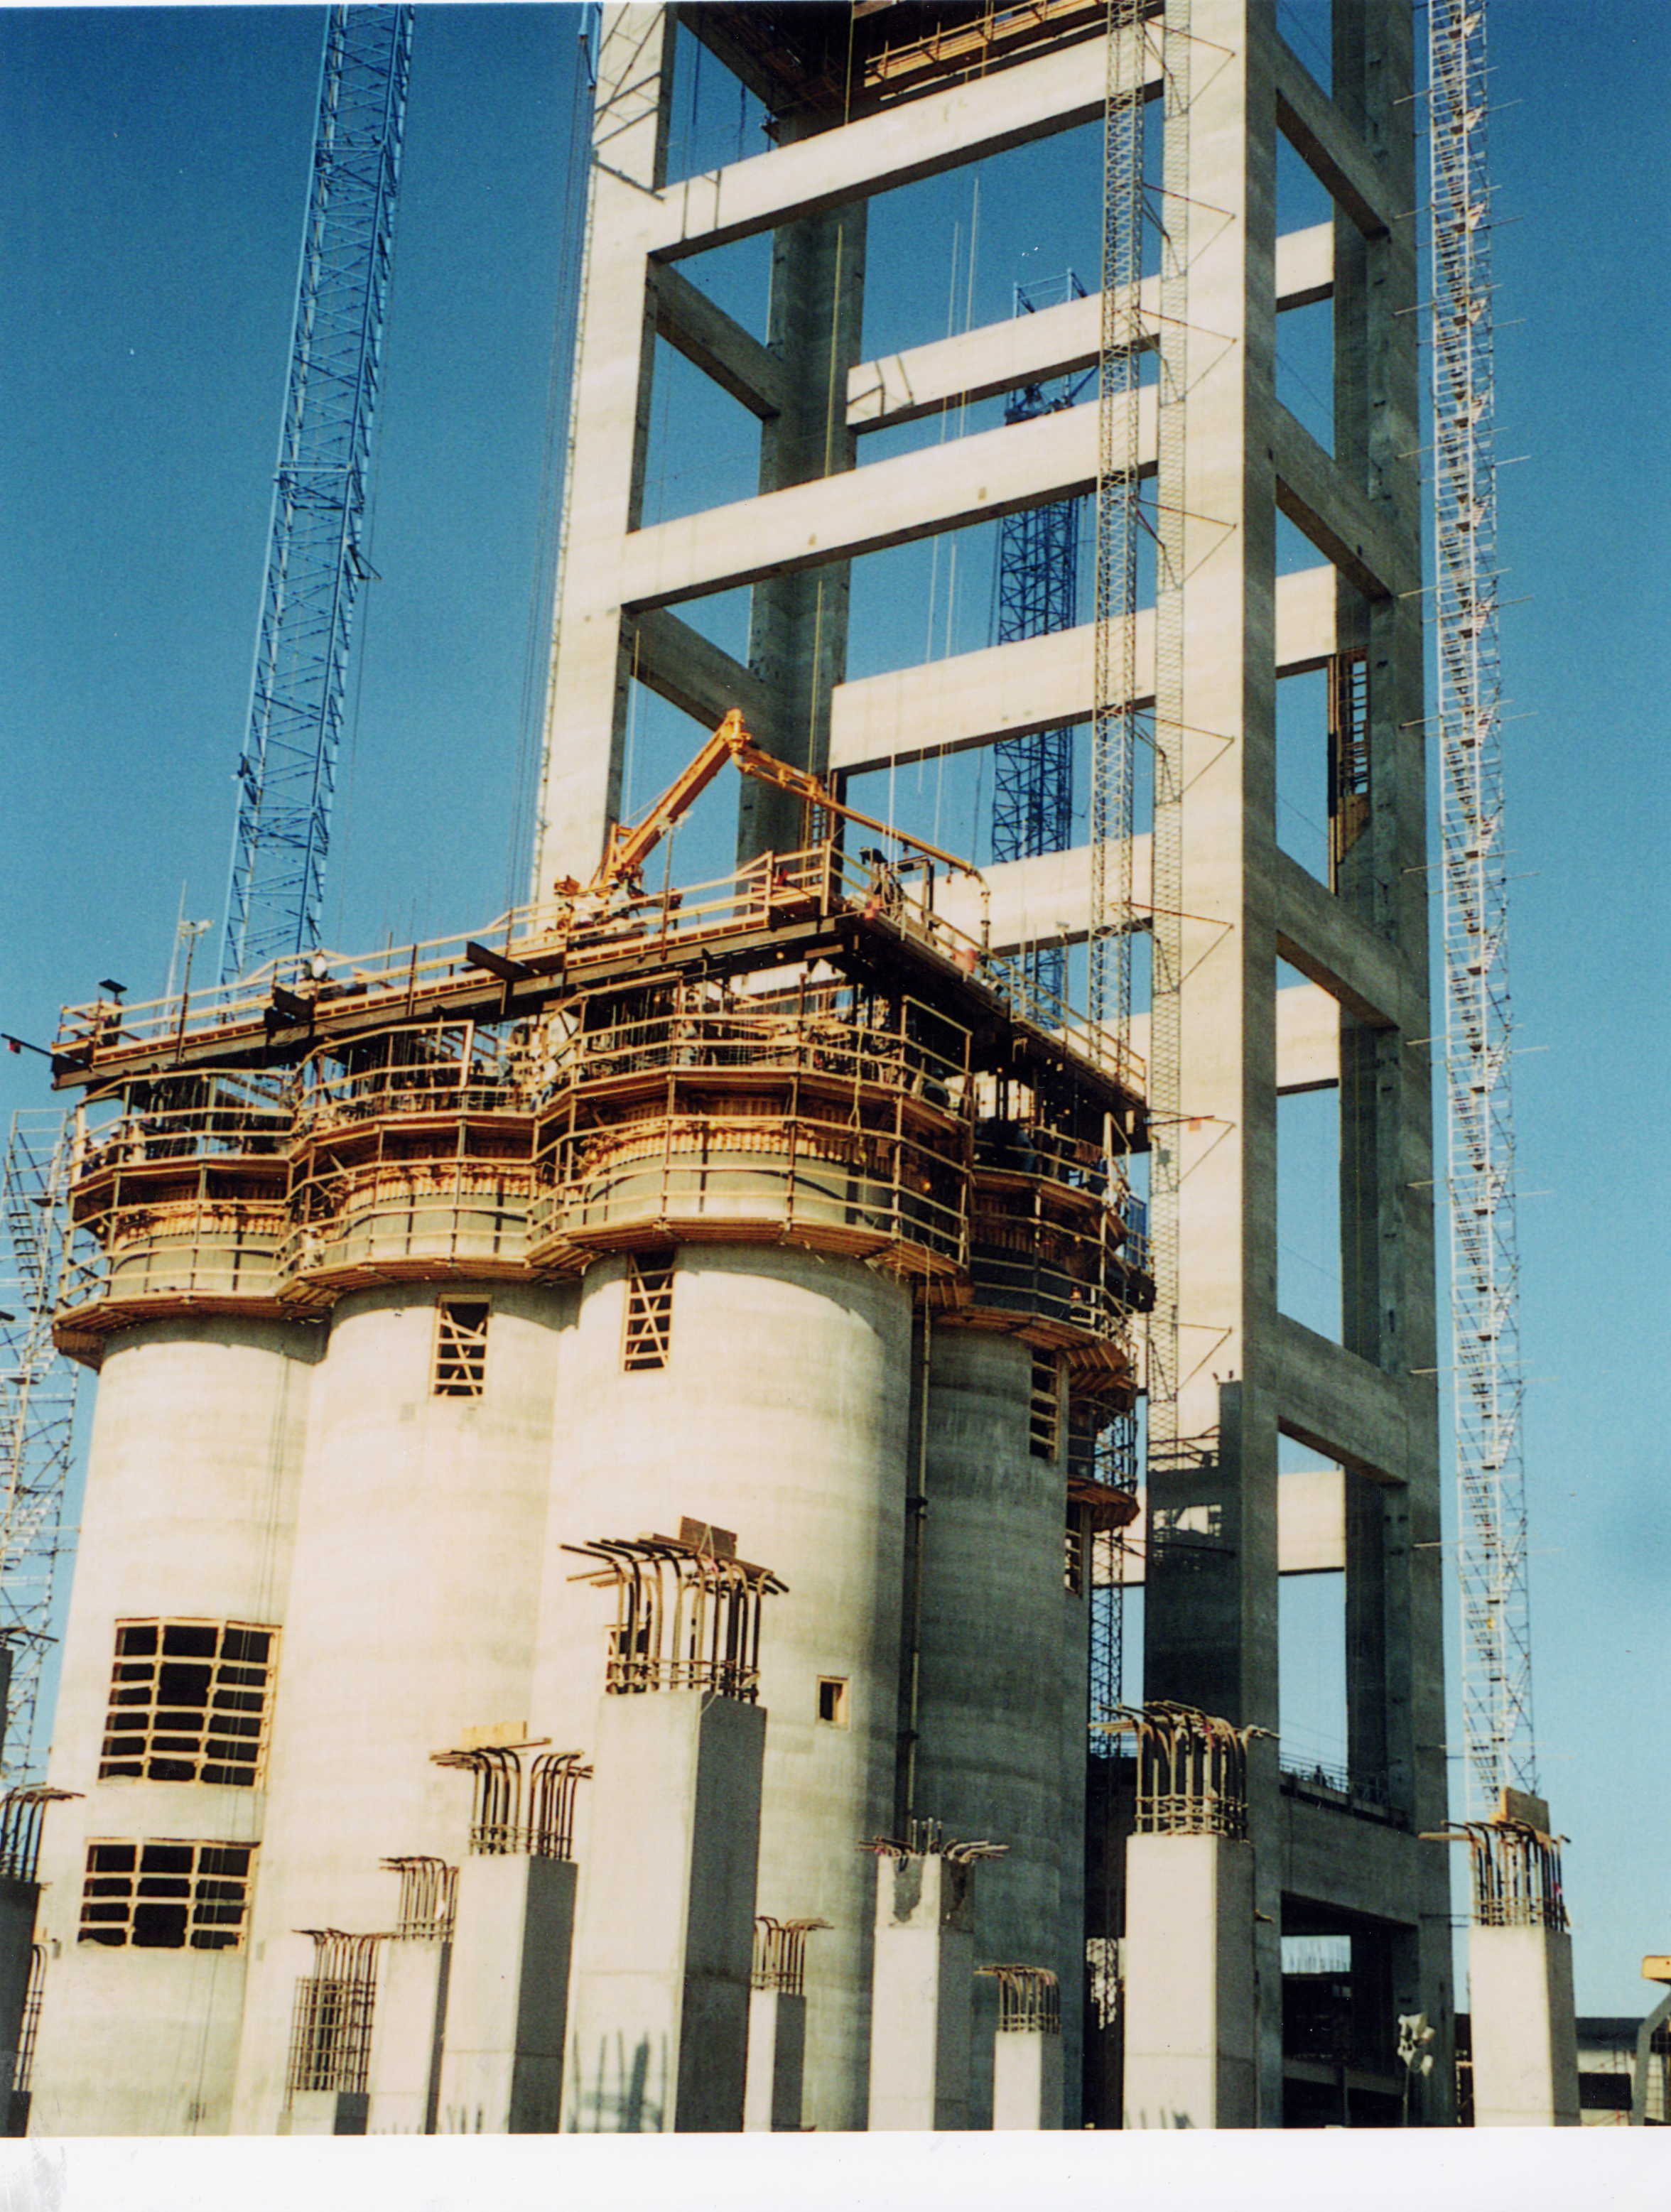 Silos, preheater towers, mass foundations, conveying systems